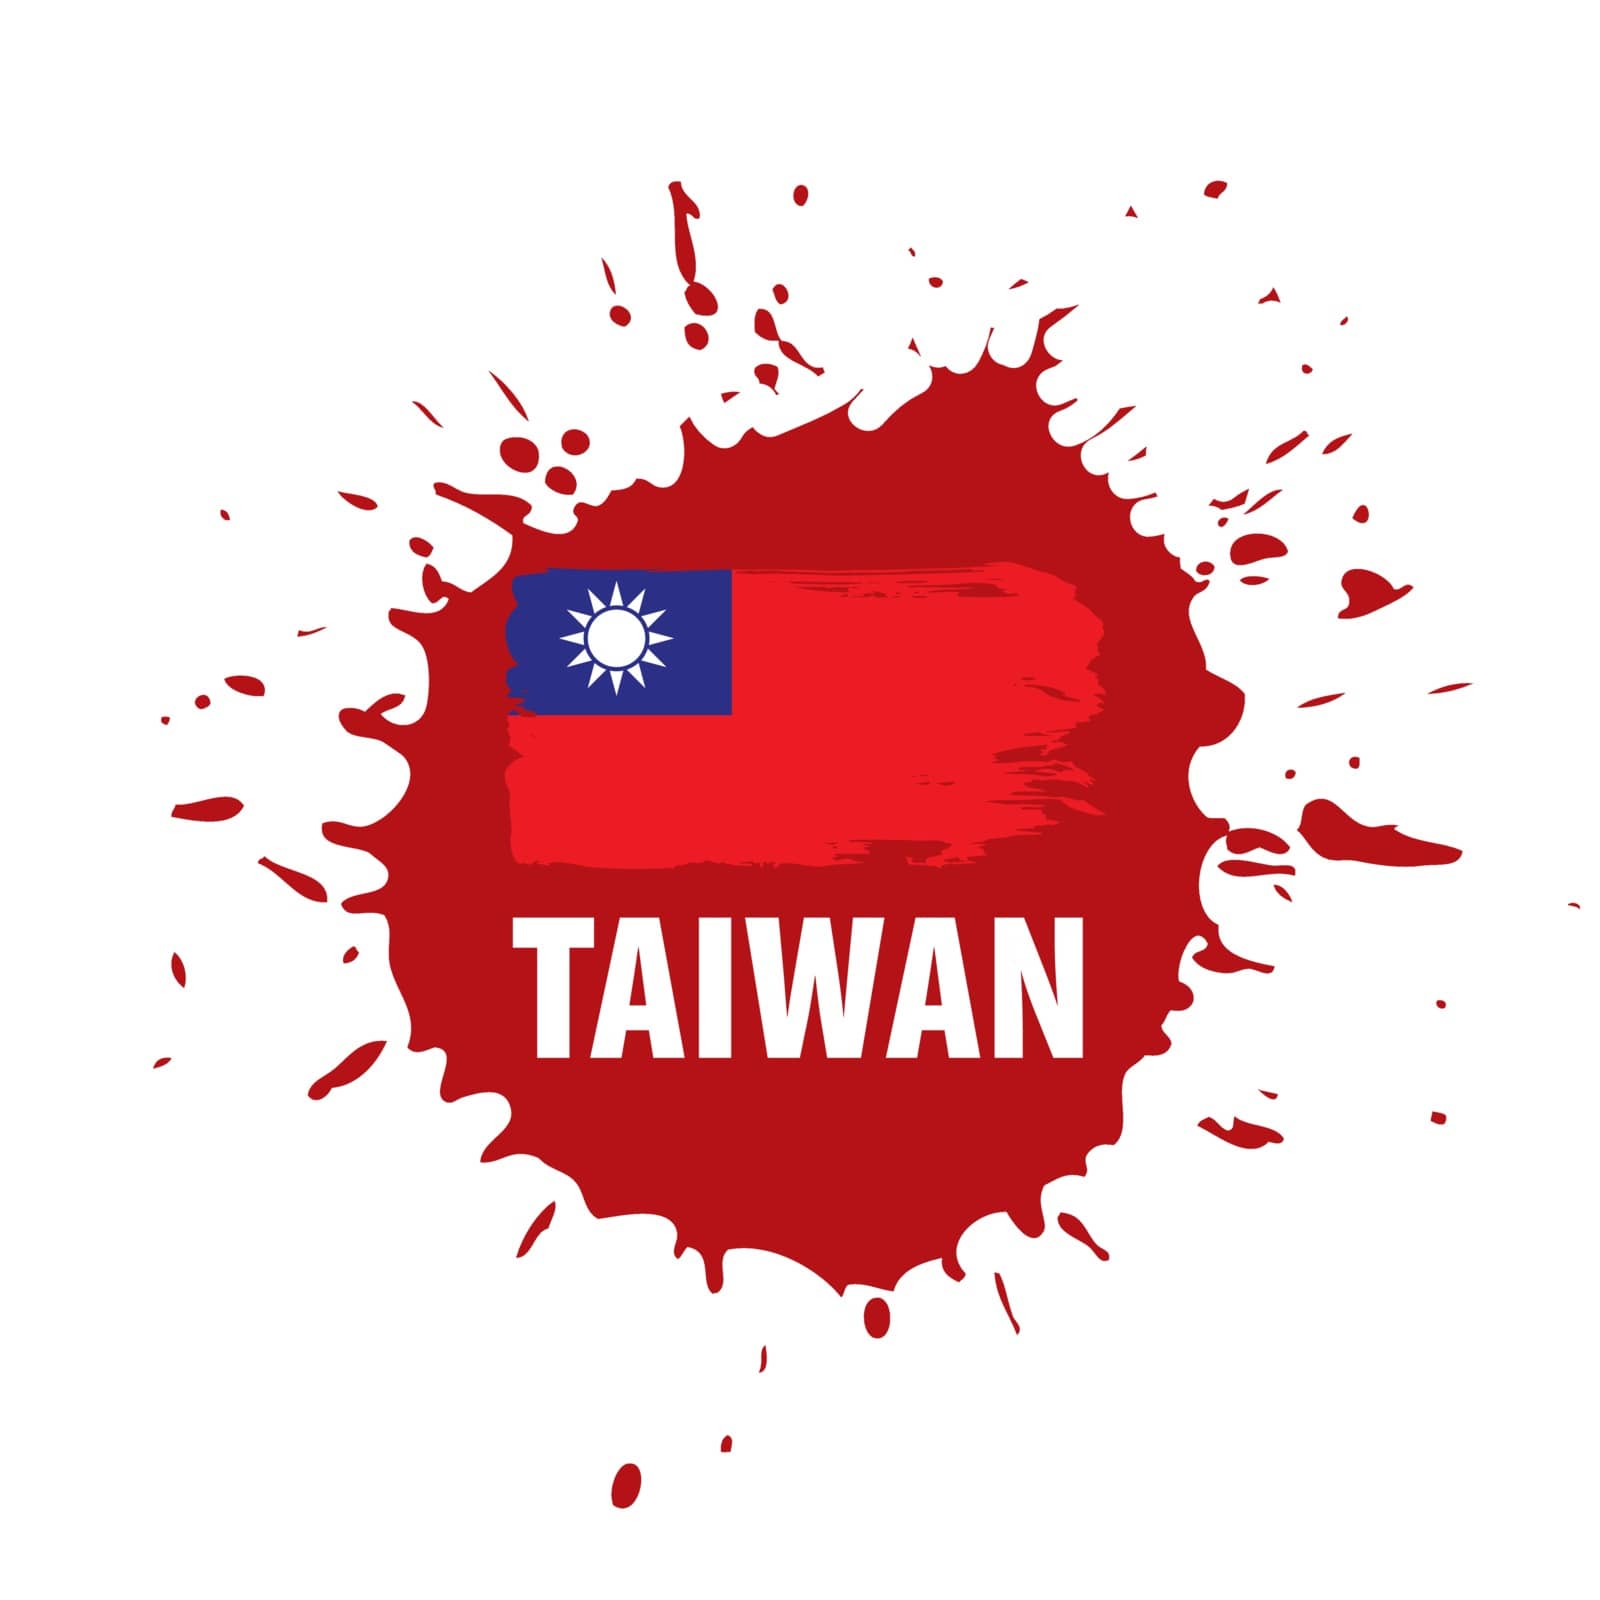 Taiwan flag, vector illustration on a white background by butenkow